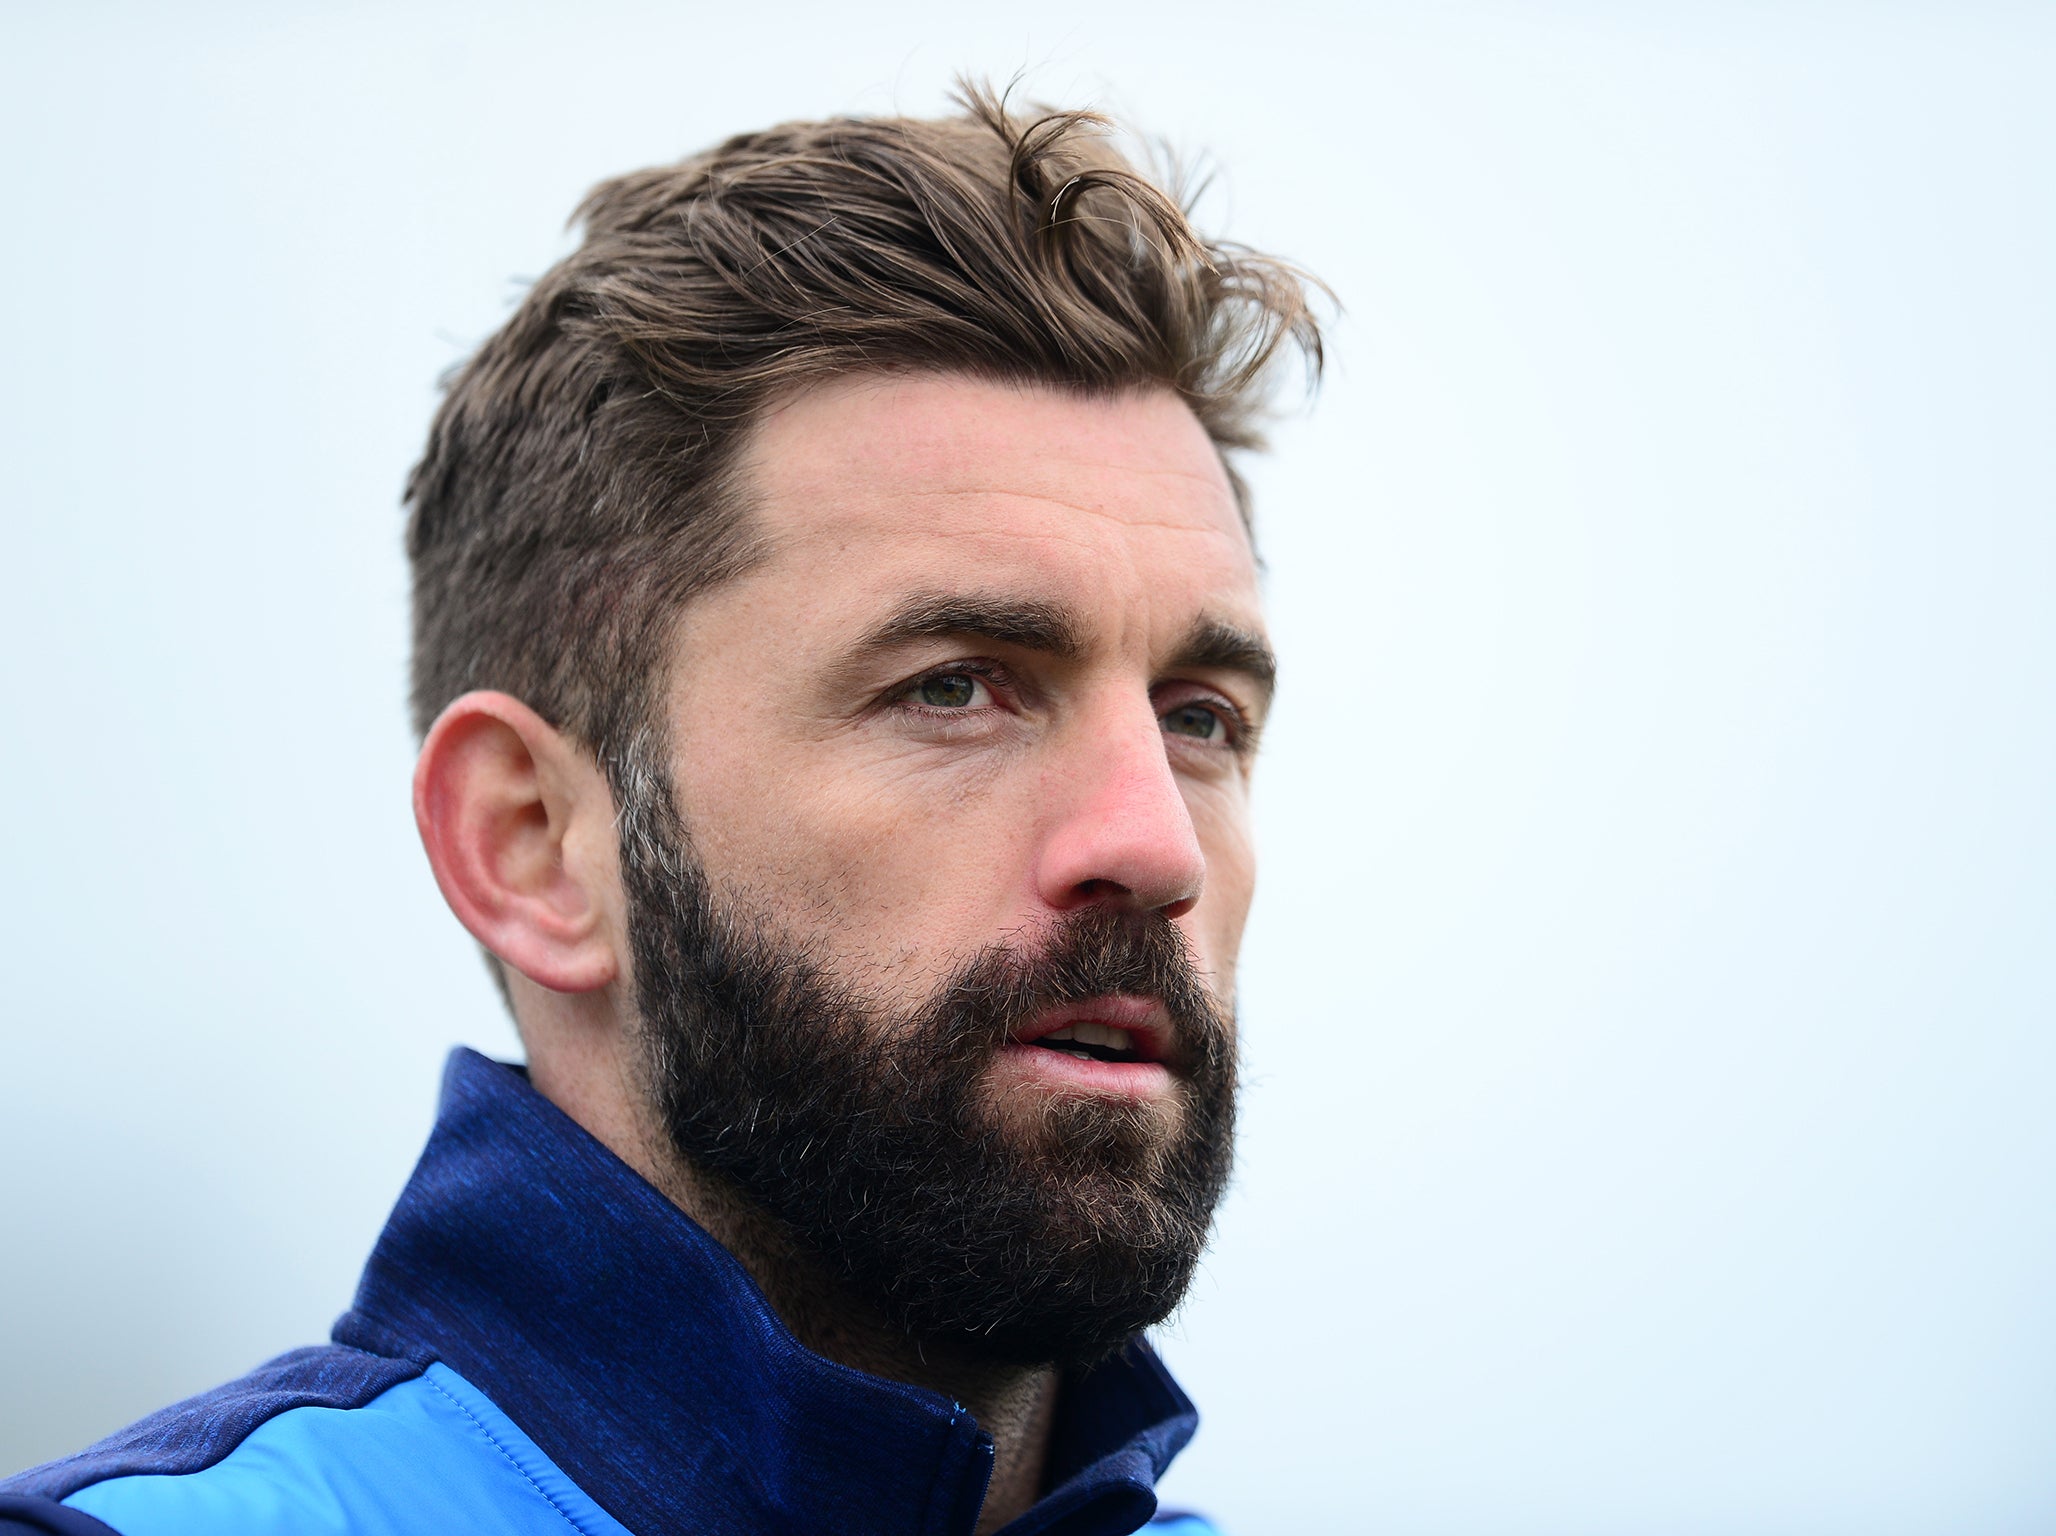 Plunkett has long stated his desire to return to England's Test team